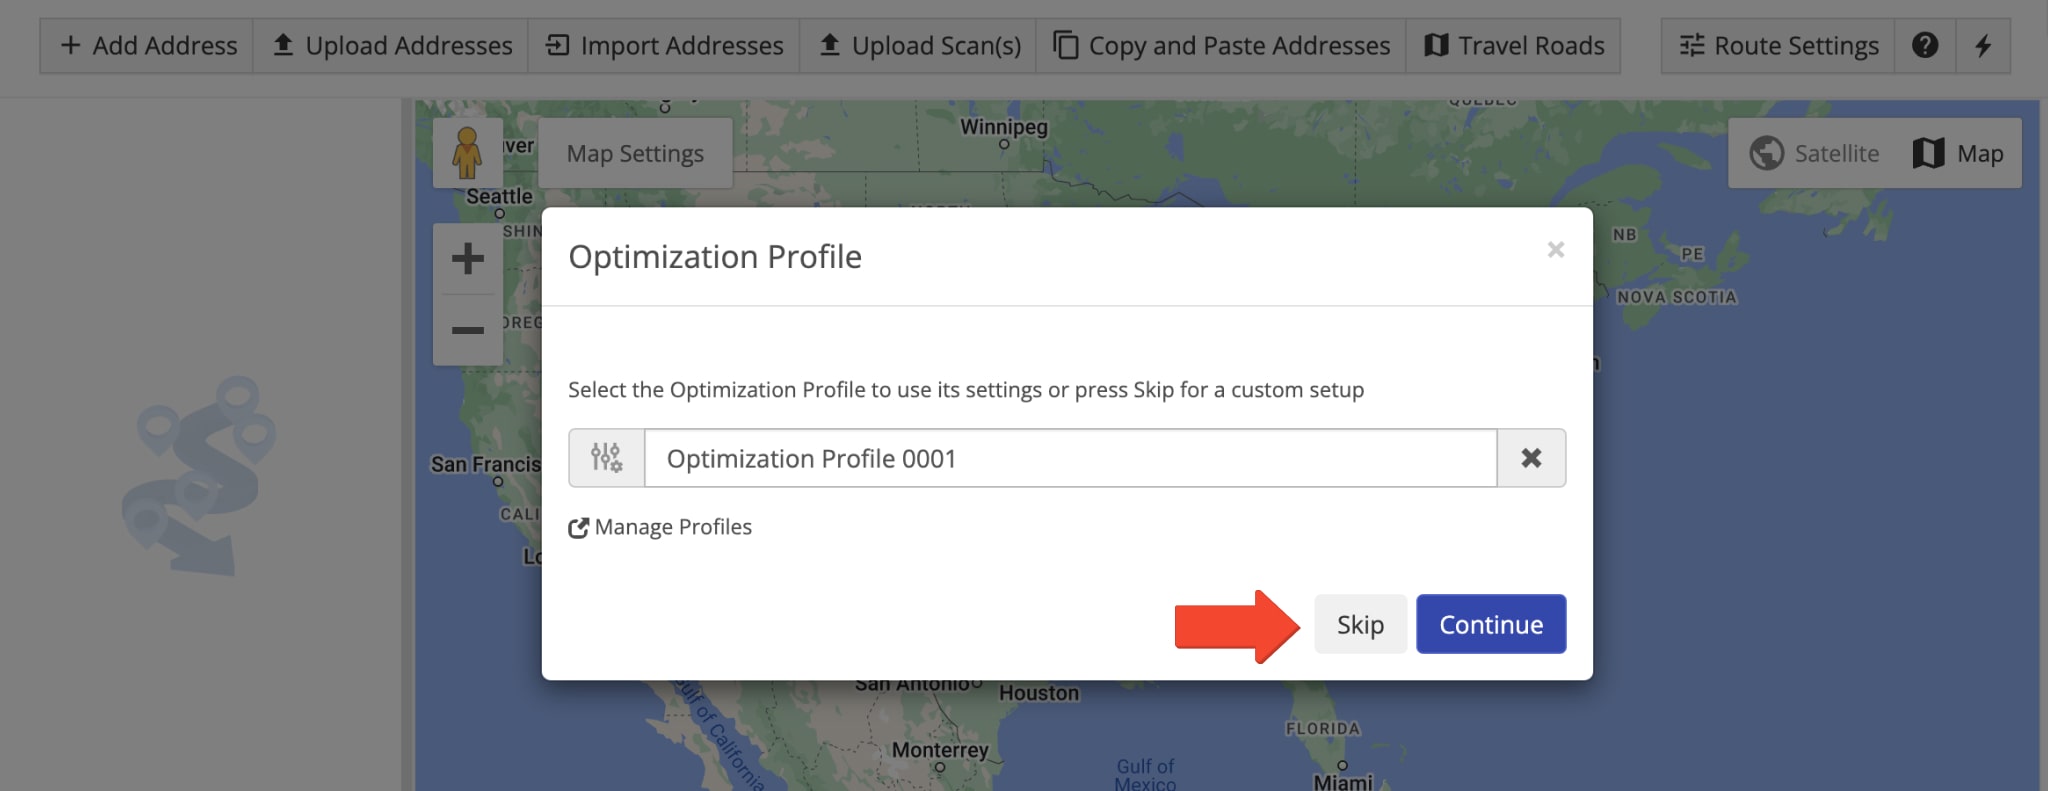 Skip selecting Route Optimization Profile to customize route and optimization settings.